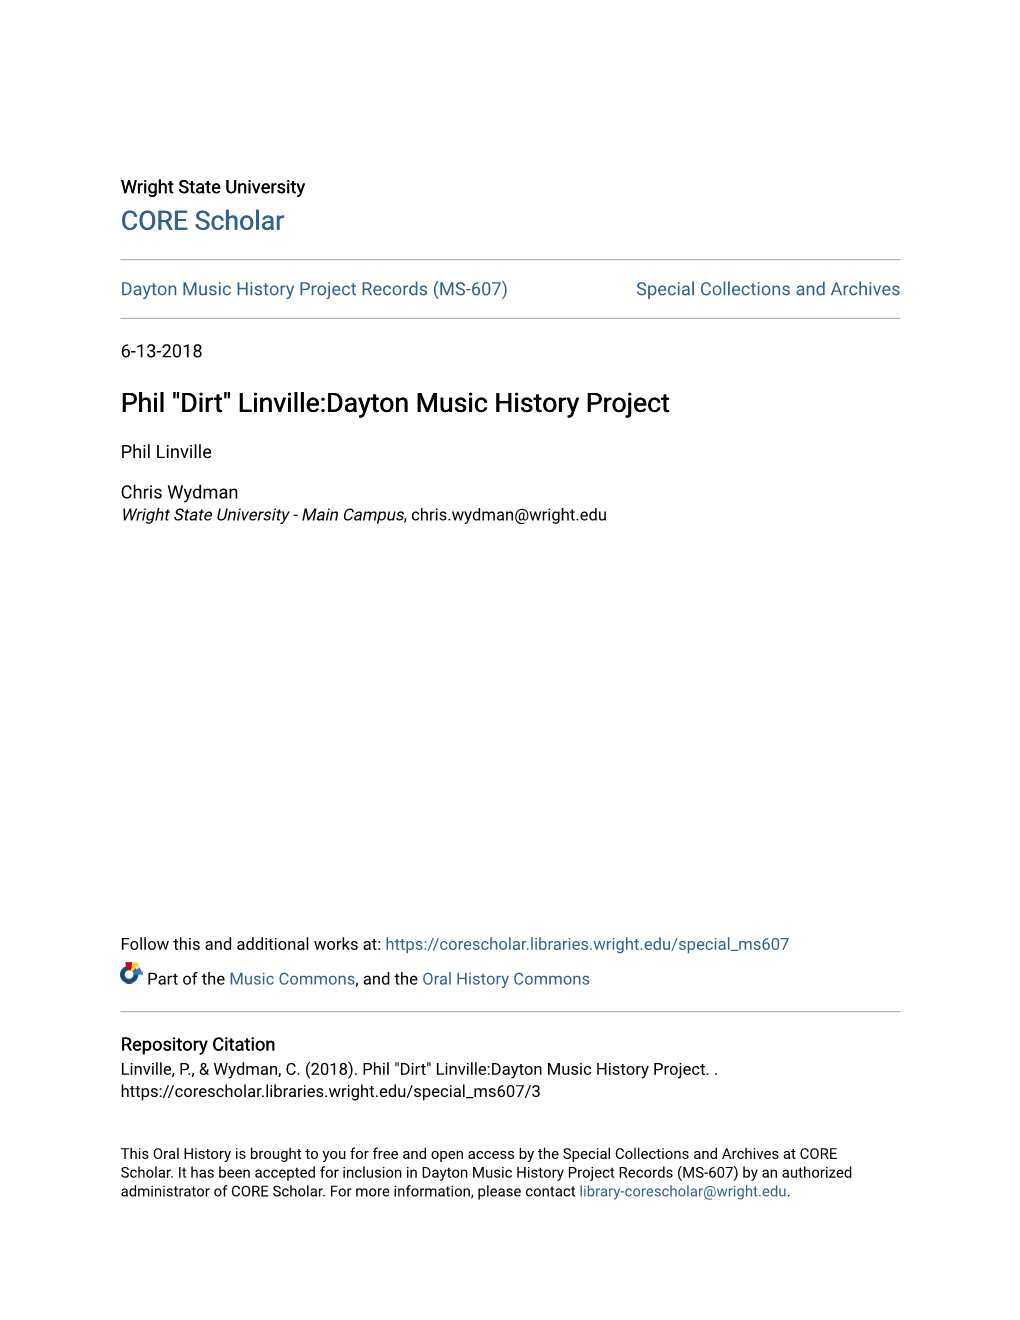 Phil "Dirt" Linville:Dayton Music History Project